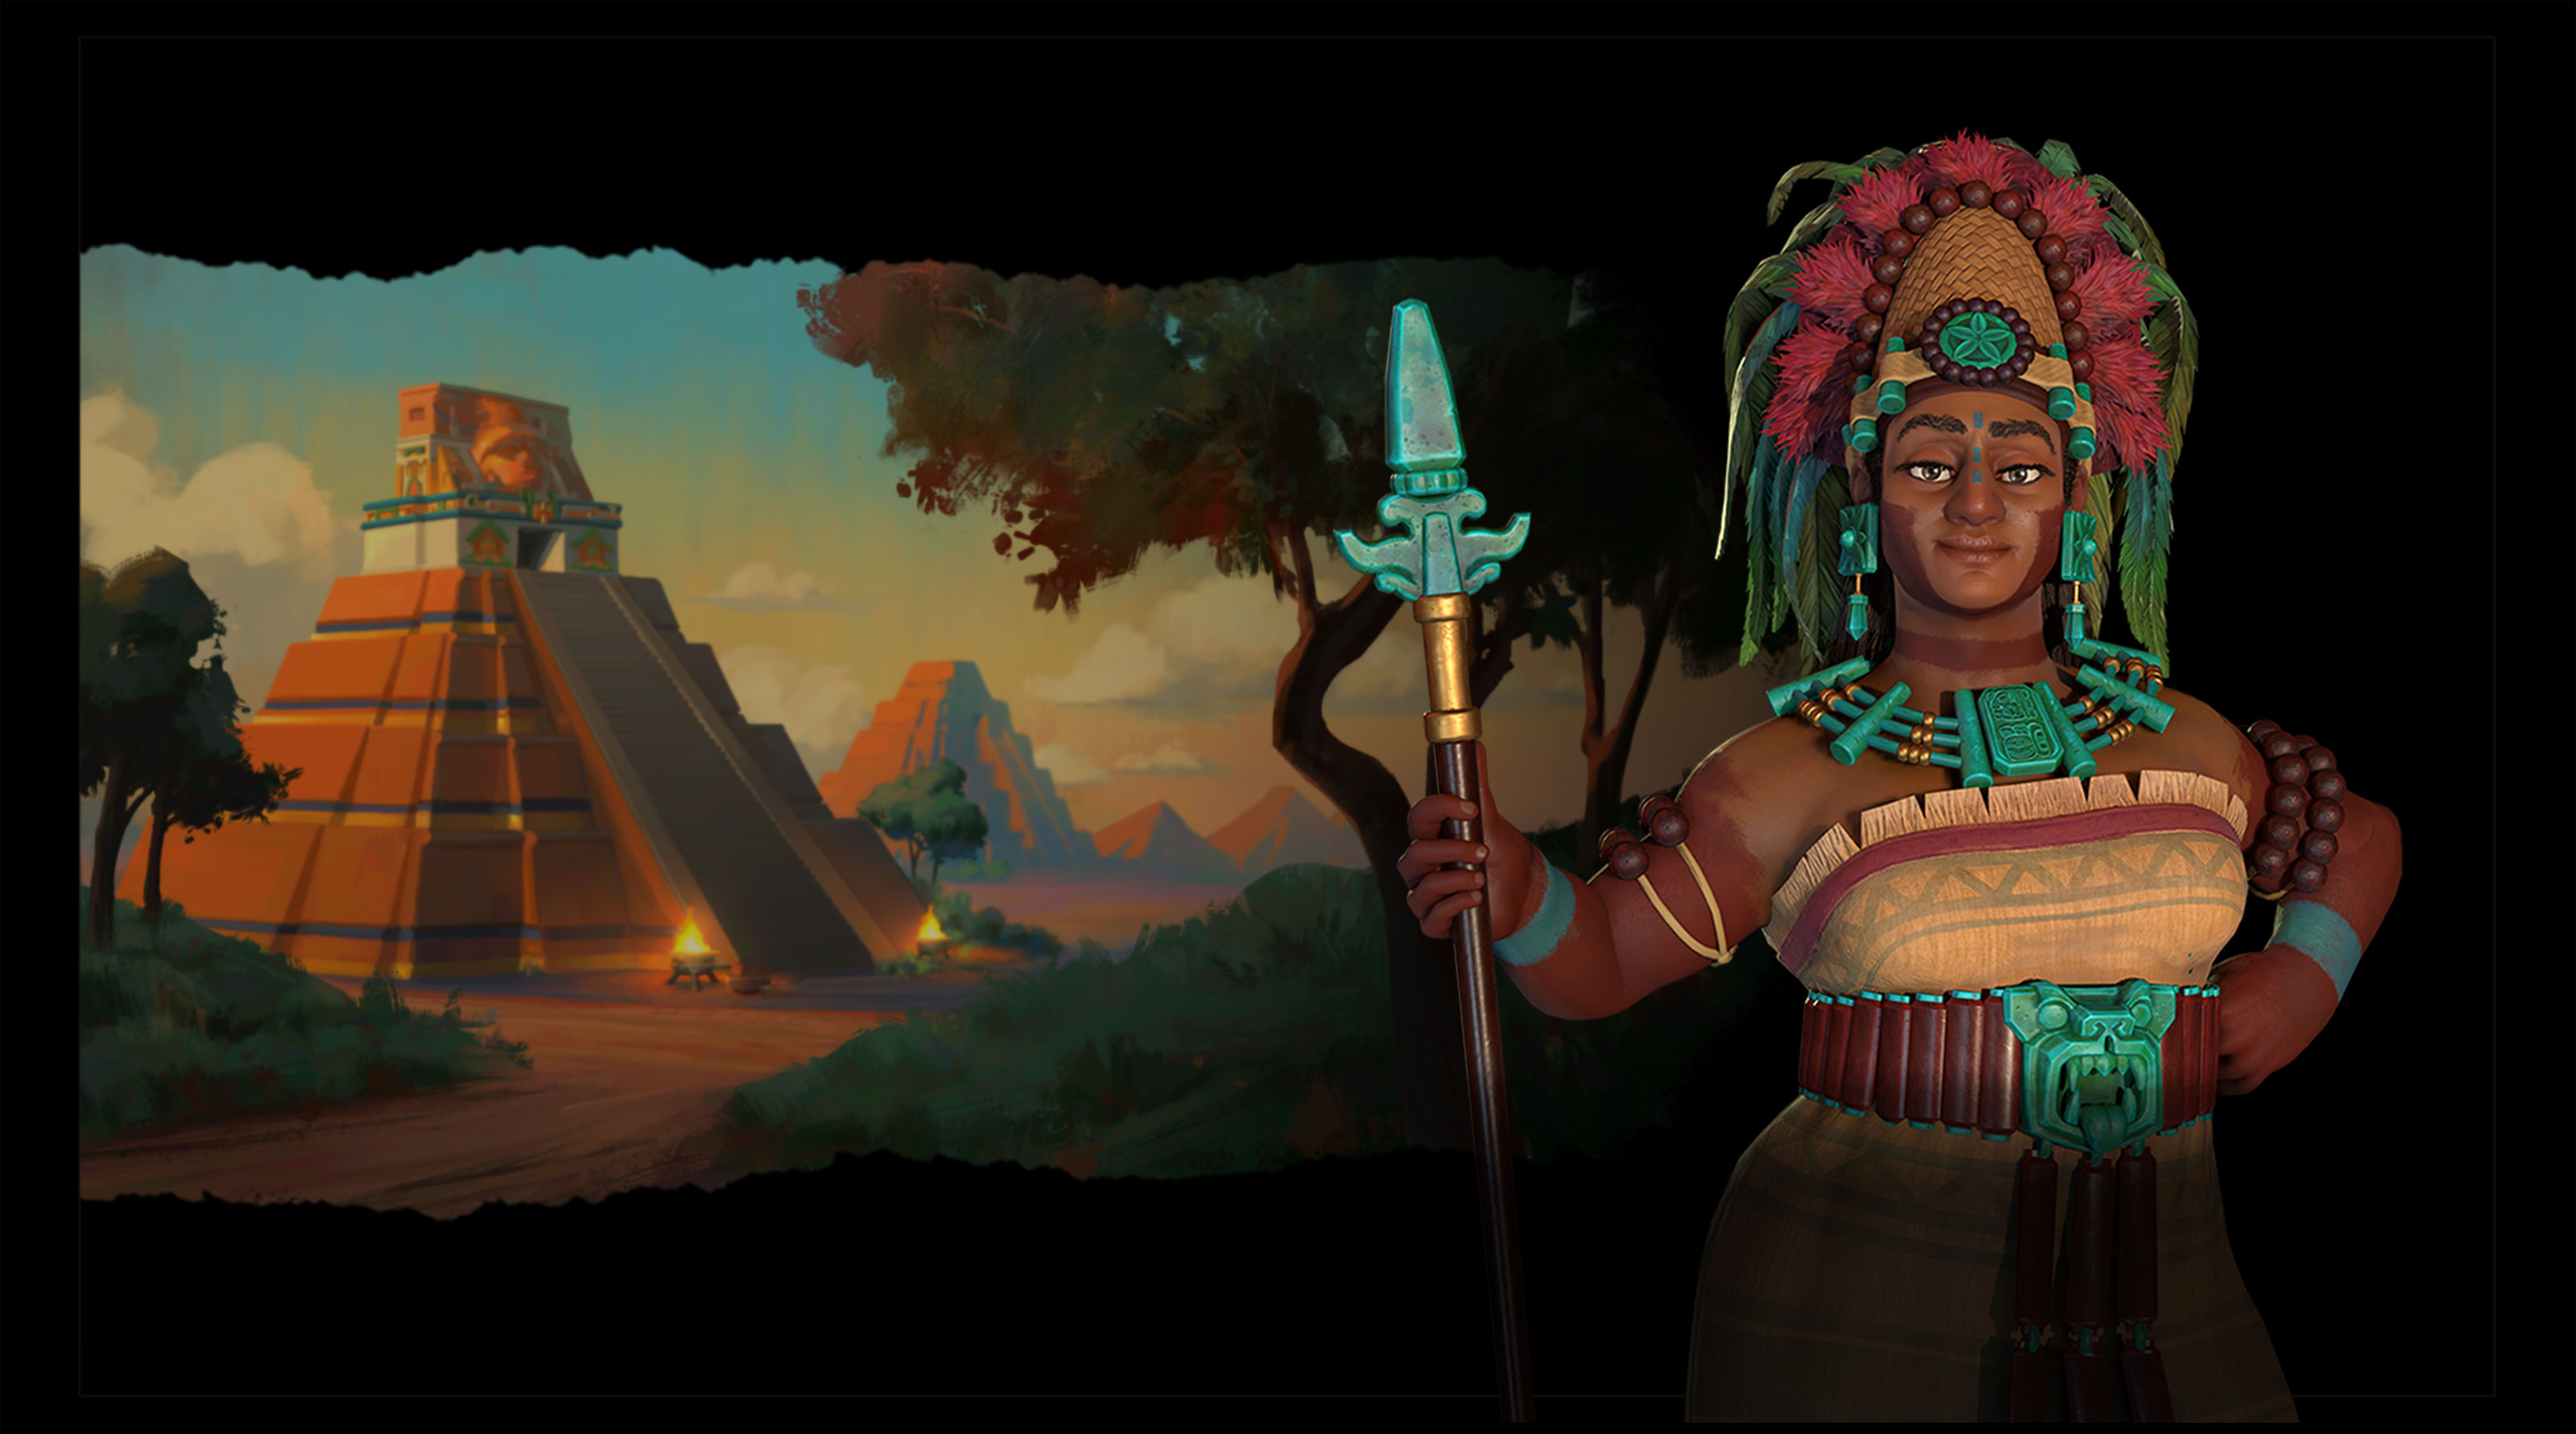 Civilization-VI-New-Frontier-Pass-Maya-Gran-Colombia-Pack-Lady-Six-Sky-Leader-Art